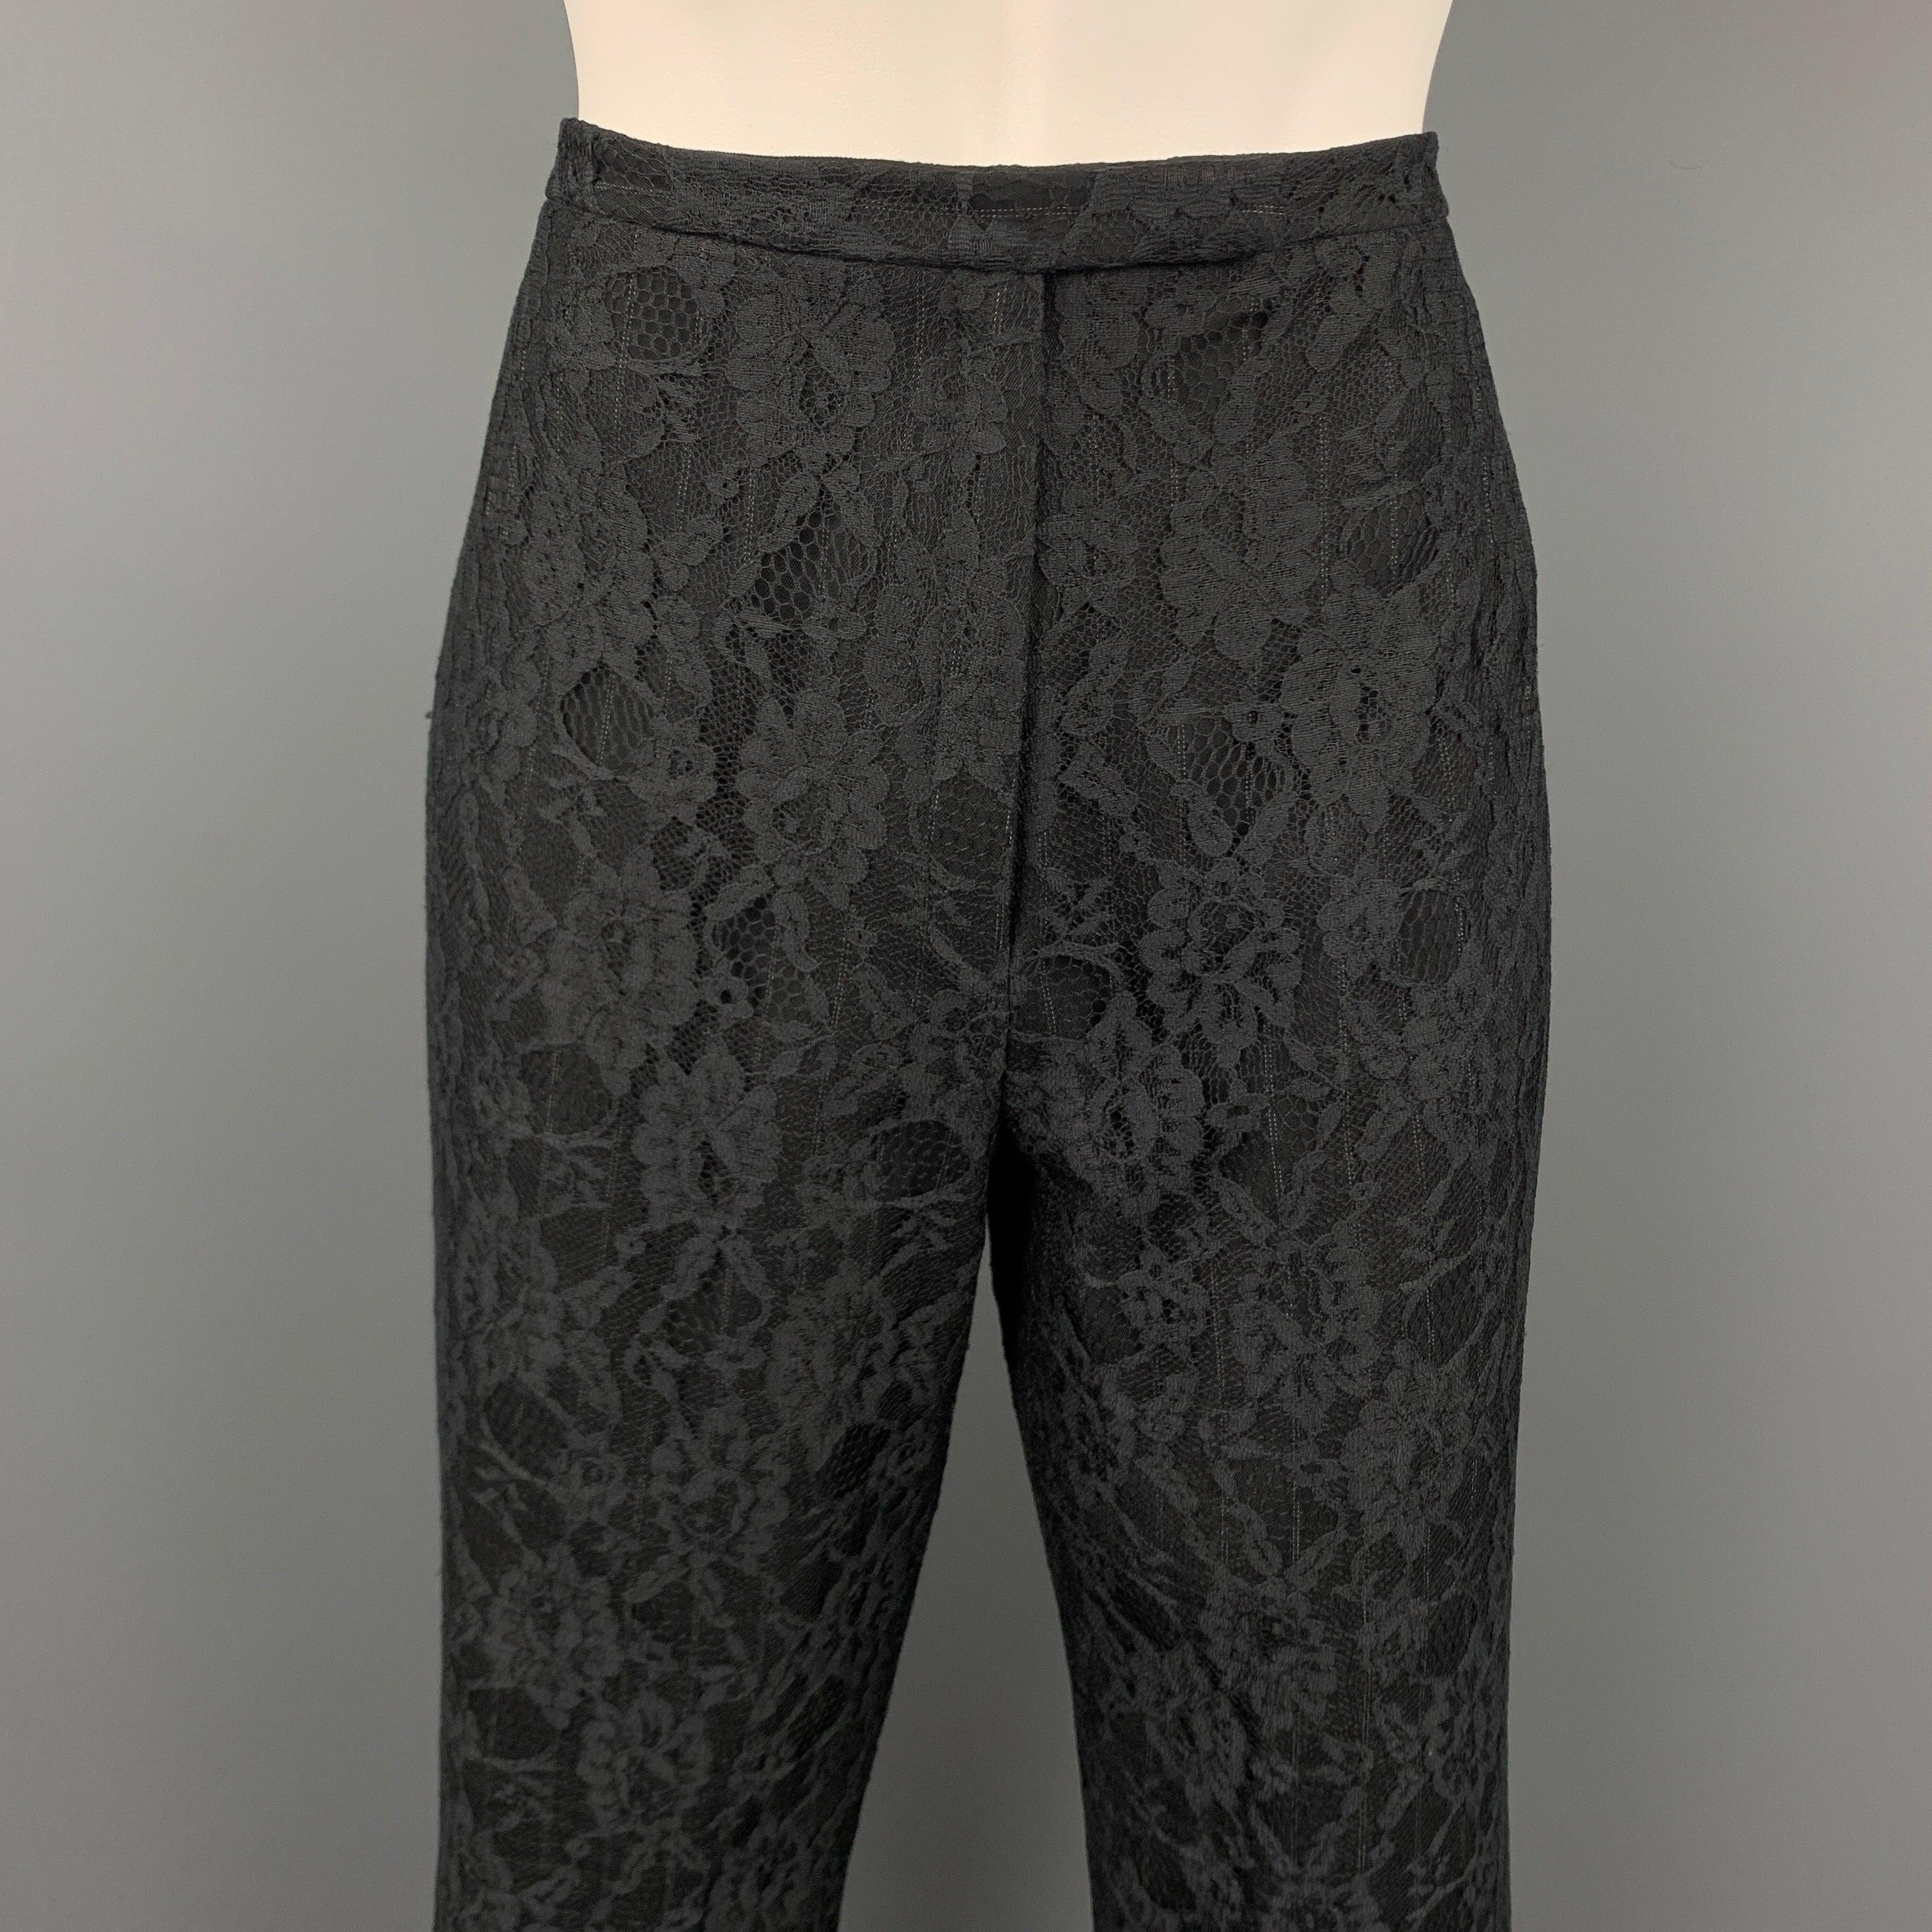 Vintage RICHARD TYLER evening dress pants comes in a black lace wool blend featuring a straight leg, front tab, and a zip fly closure. Made in USA.Very Good
Pre-Owned Condition. 

Marked:   10 

Measurements: 
  Waist: 30 inches 
Rise: 10 inches